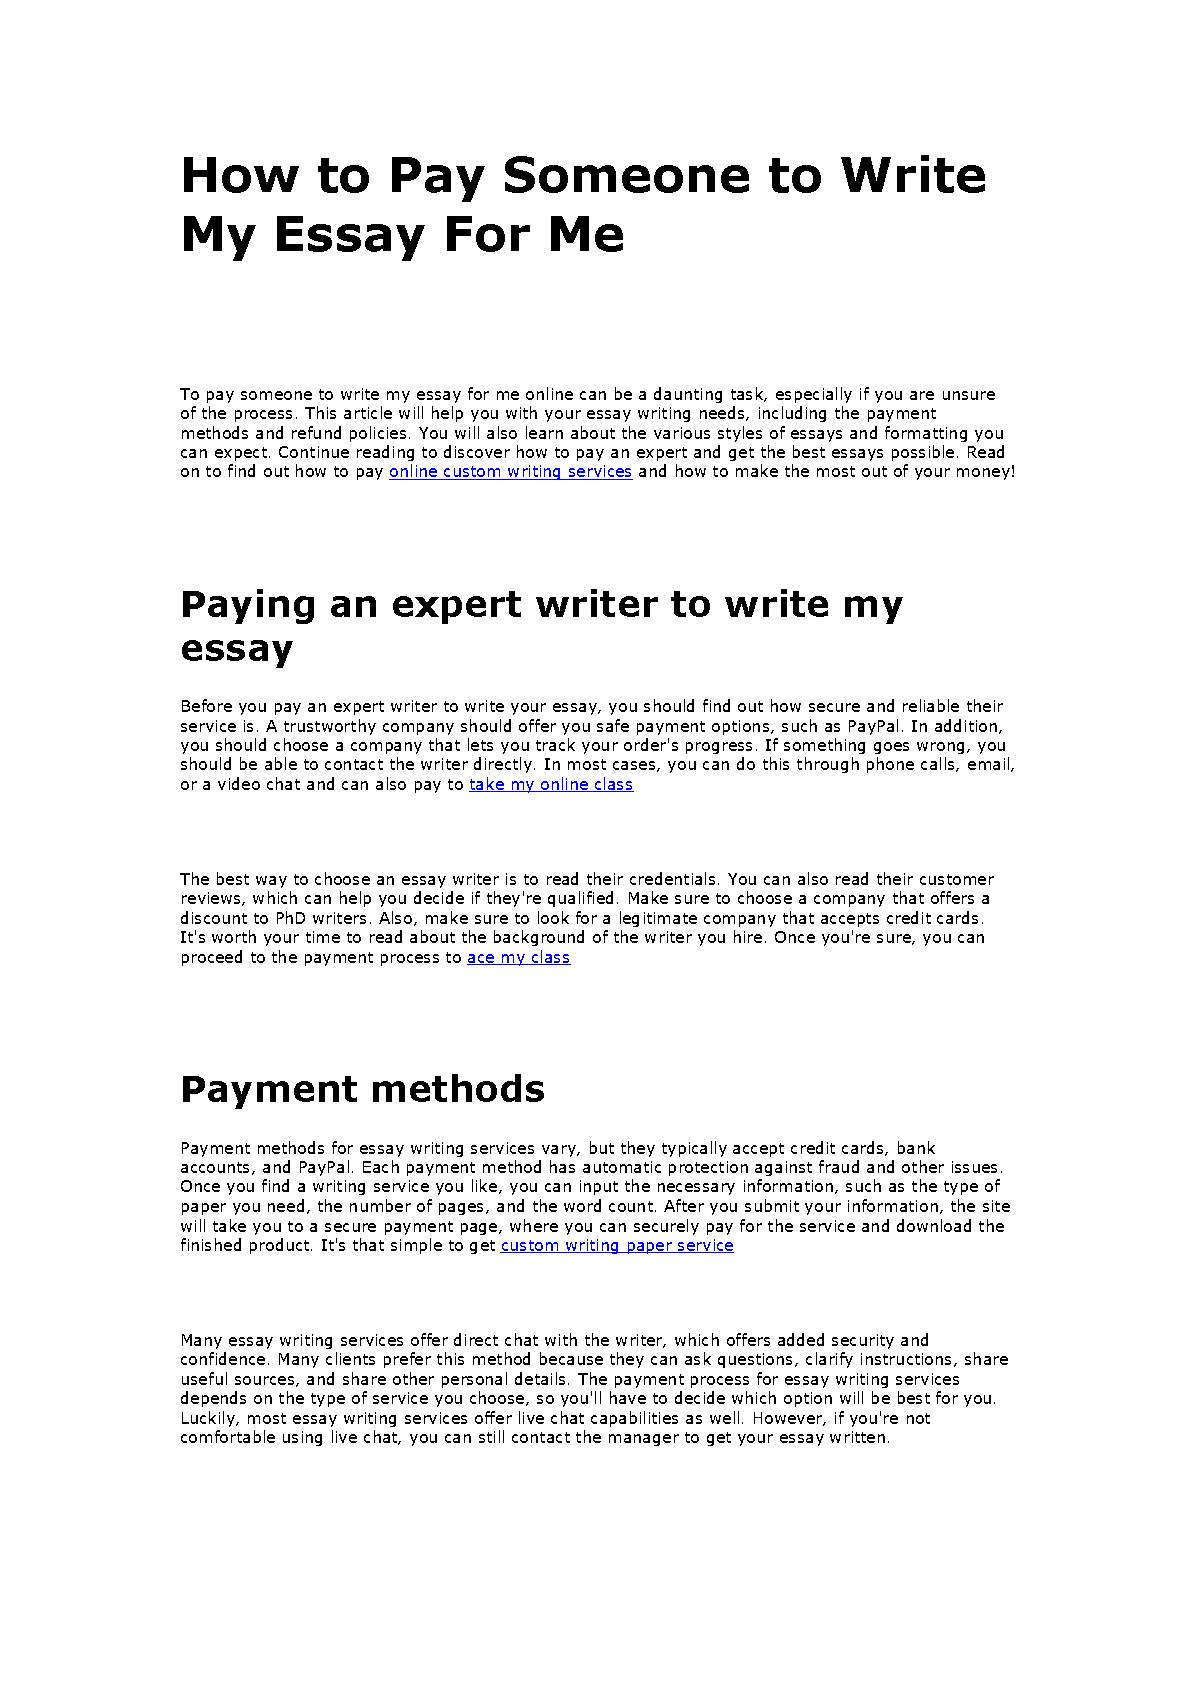 pay someone to write your essay reddit